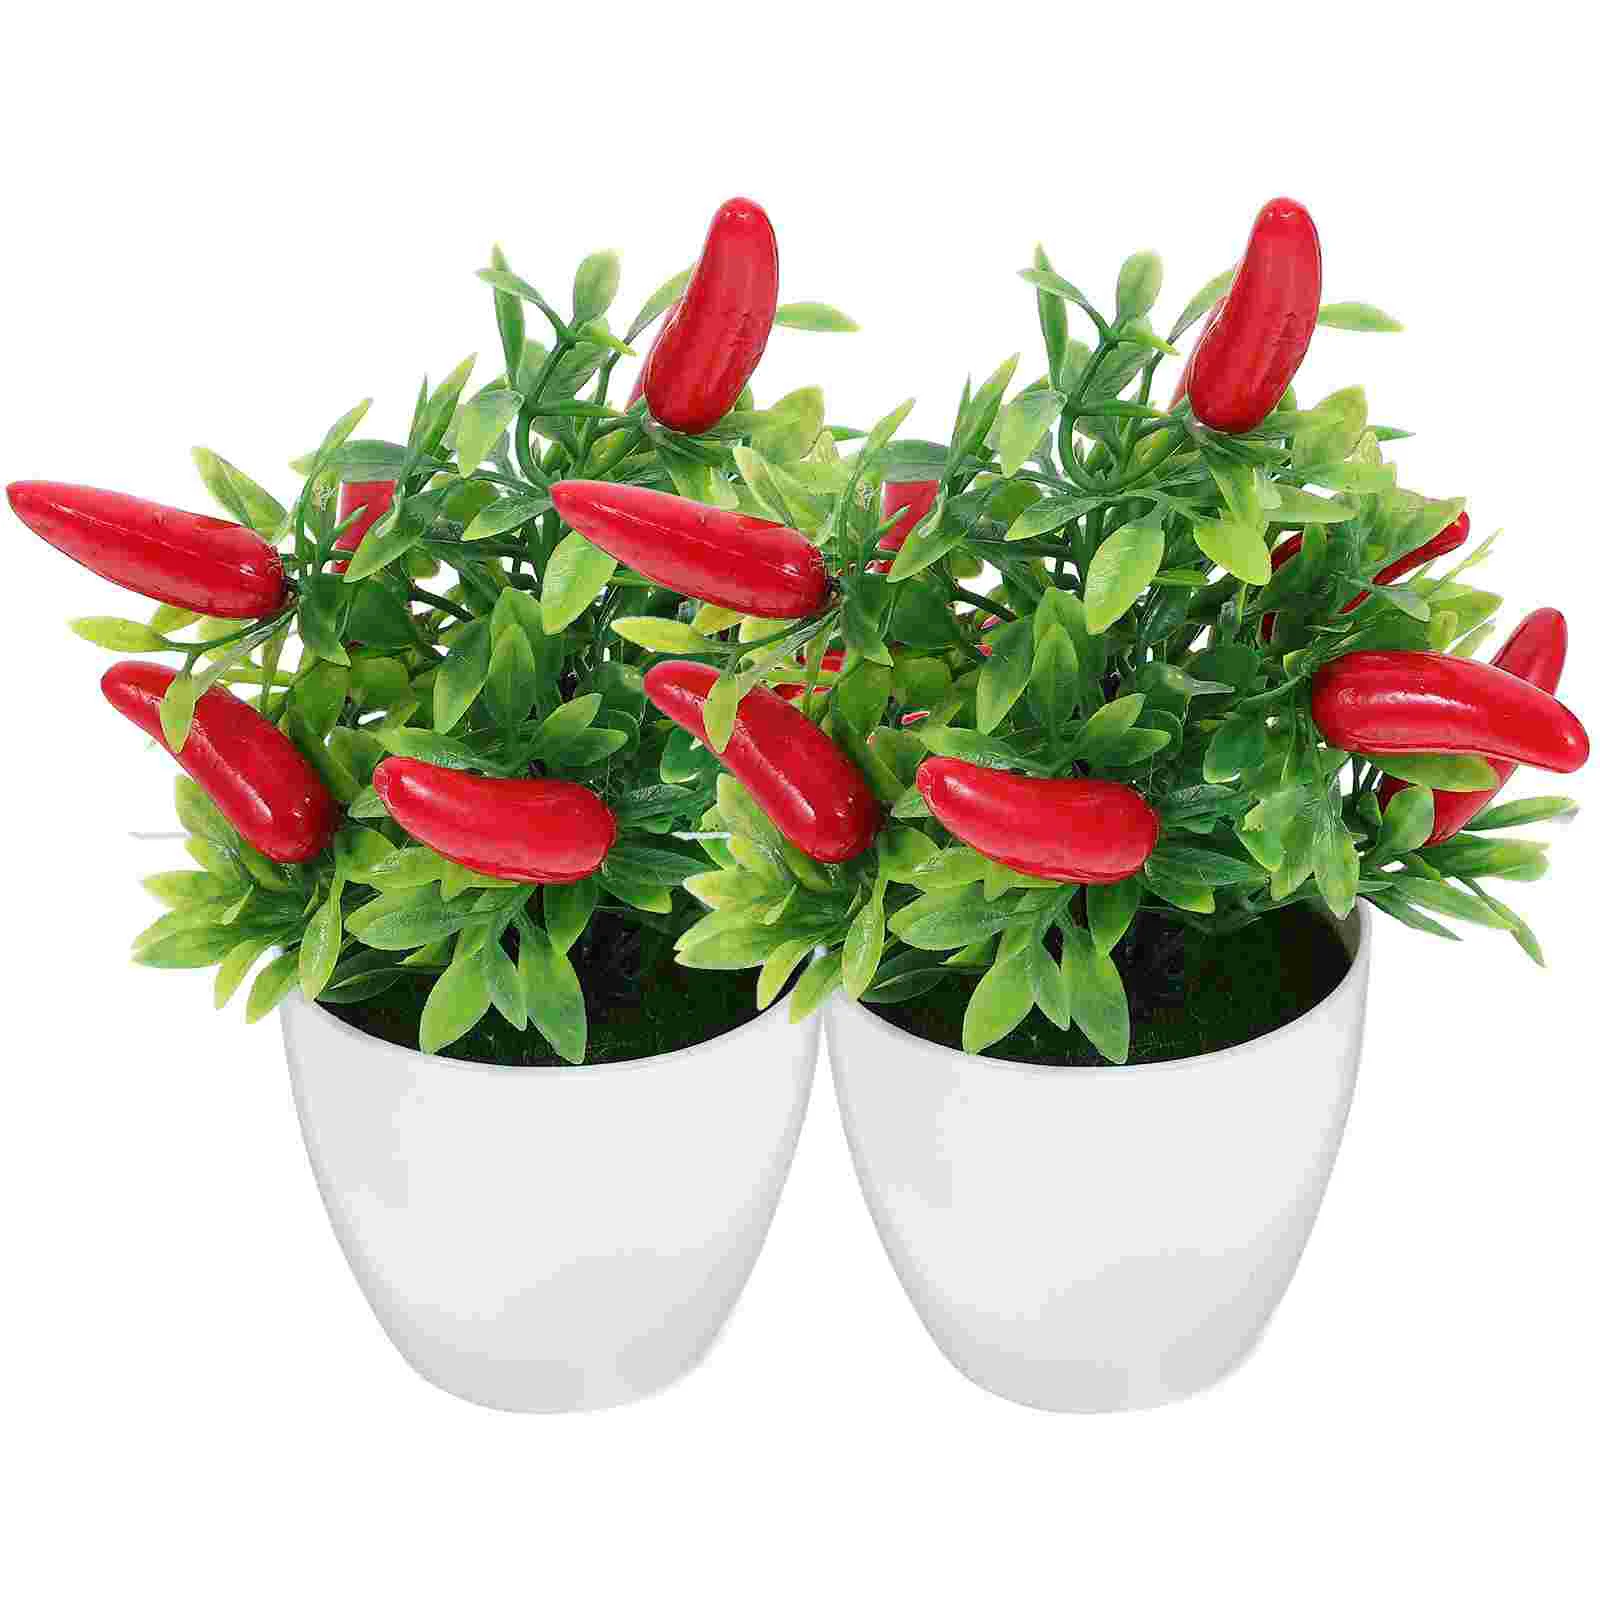 

2pcs Potted Plant Pepper Tree Artificial Pepper Tree Bonsai Potted Plant Adornment